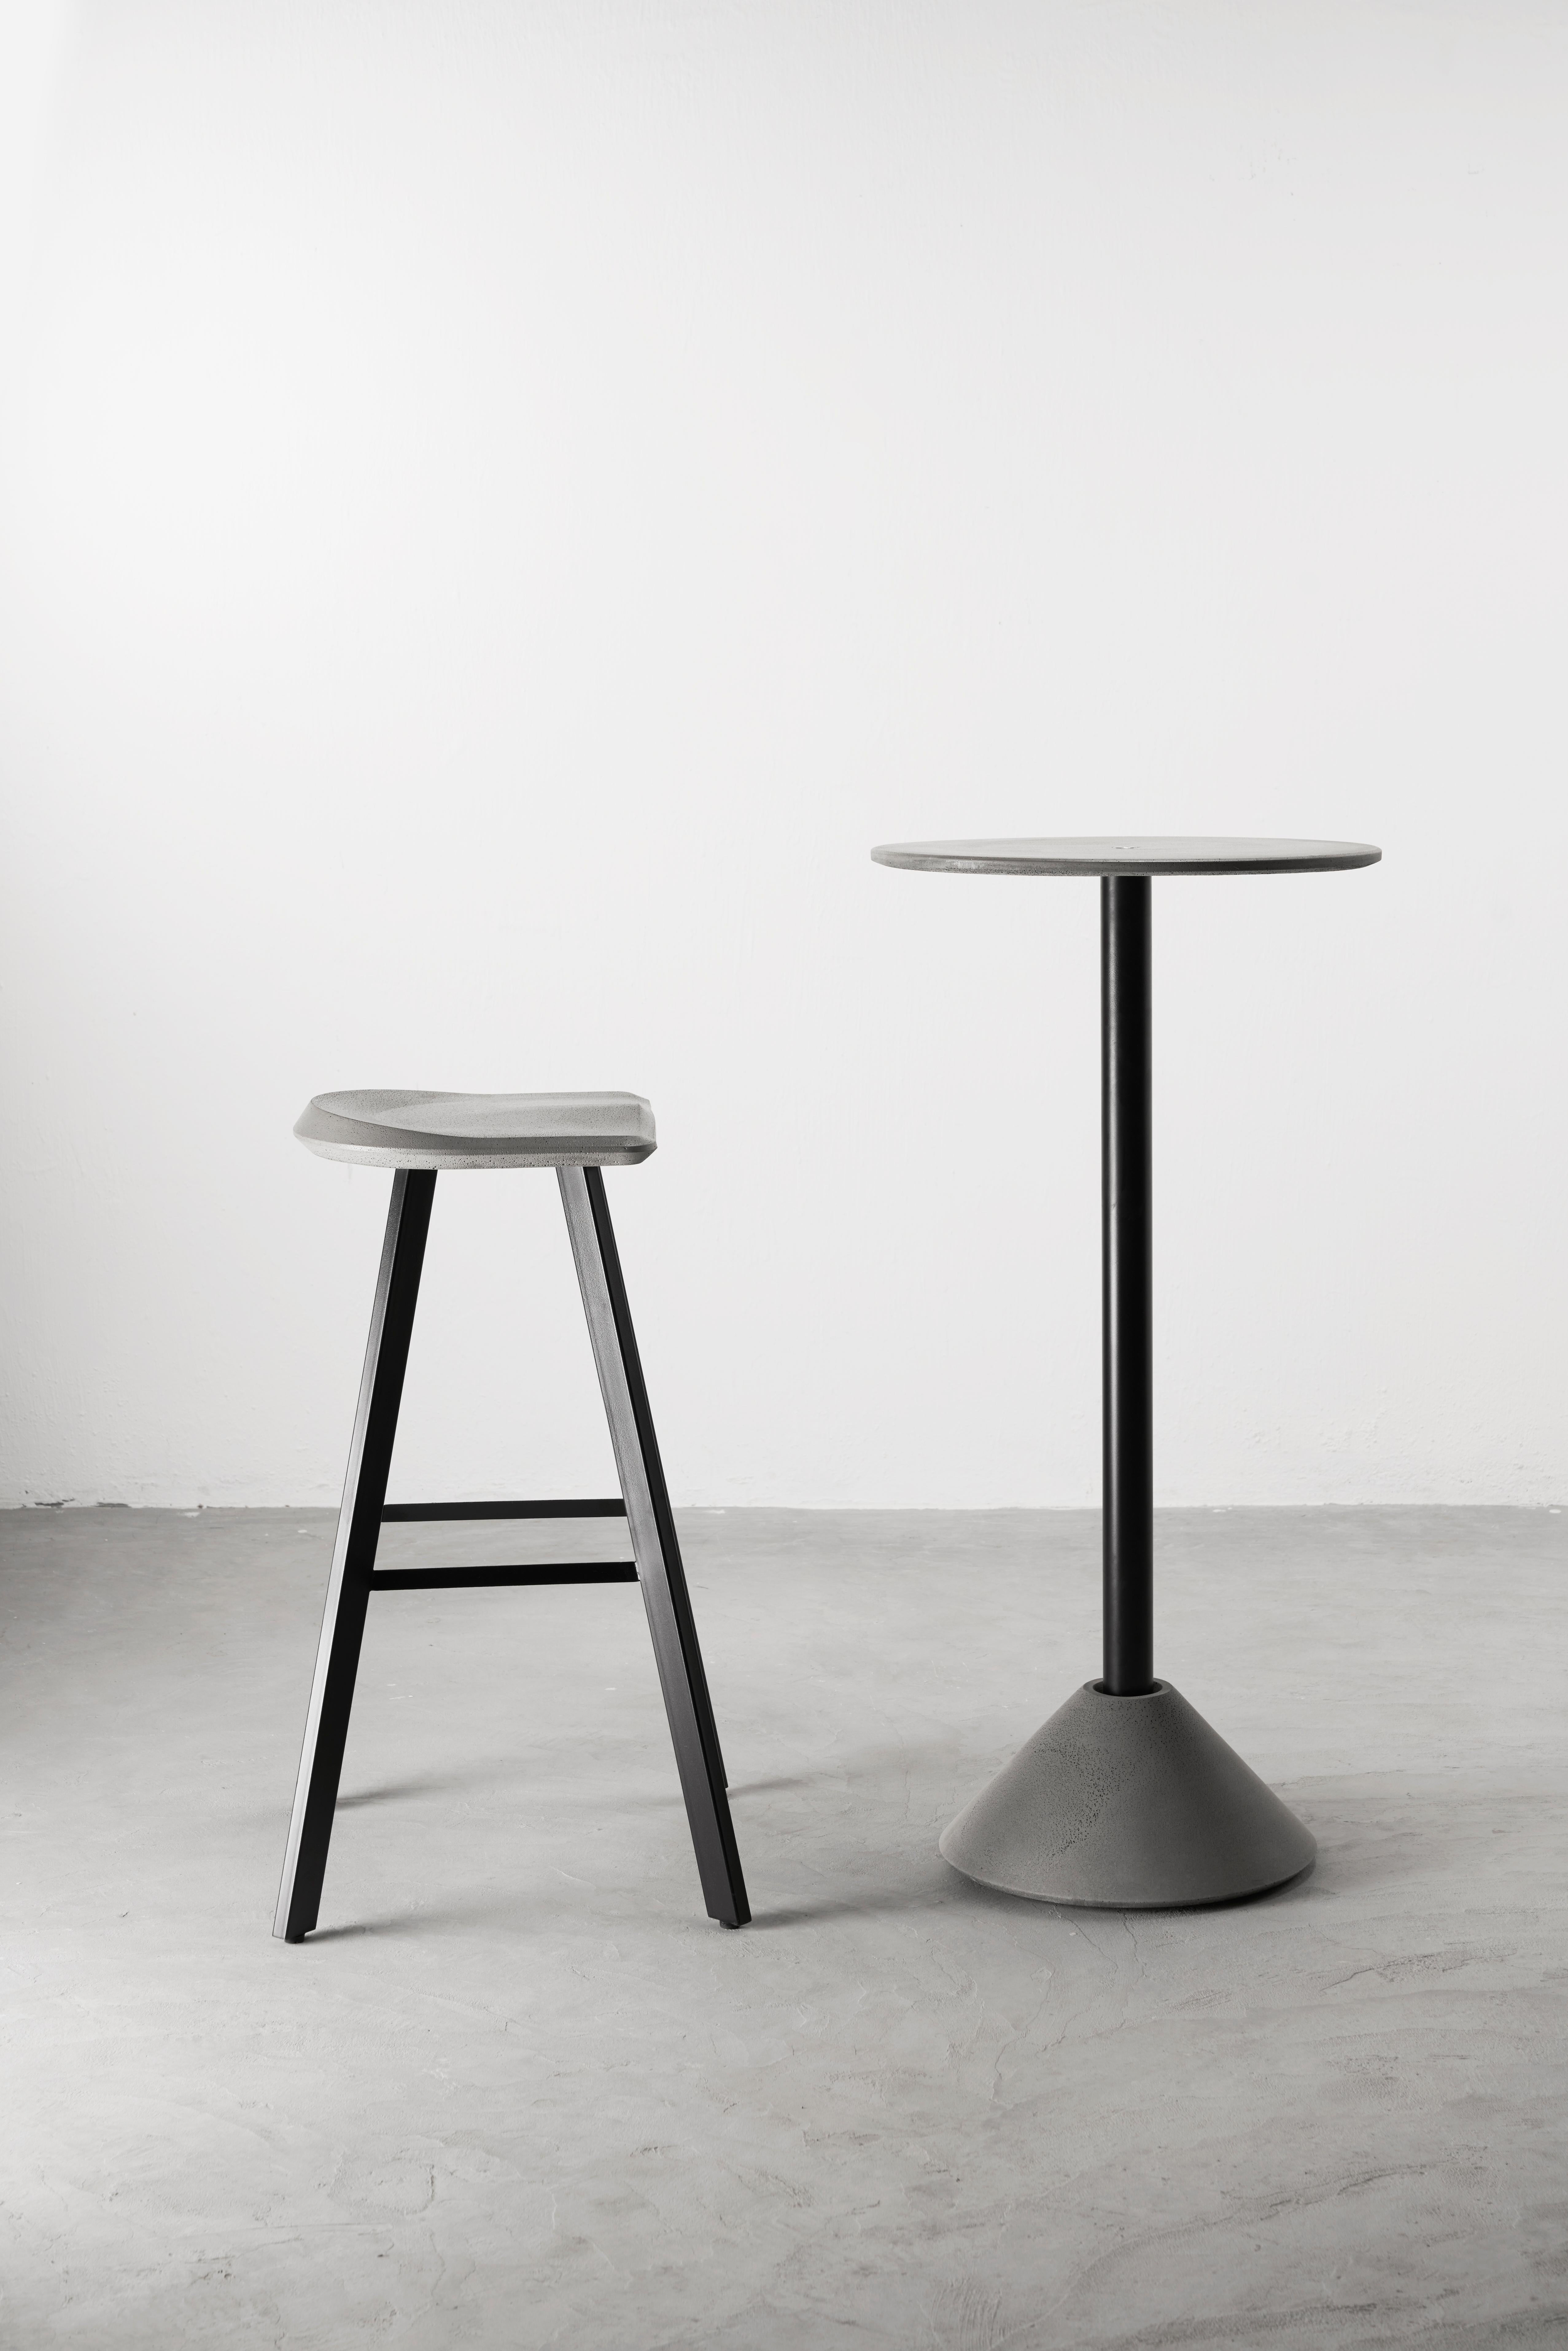 Contemporary Concrete and Powder-Coated Steel Bar Stool, “A, ” from Concrete Collection